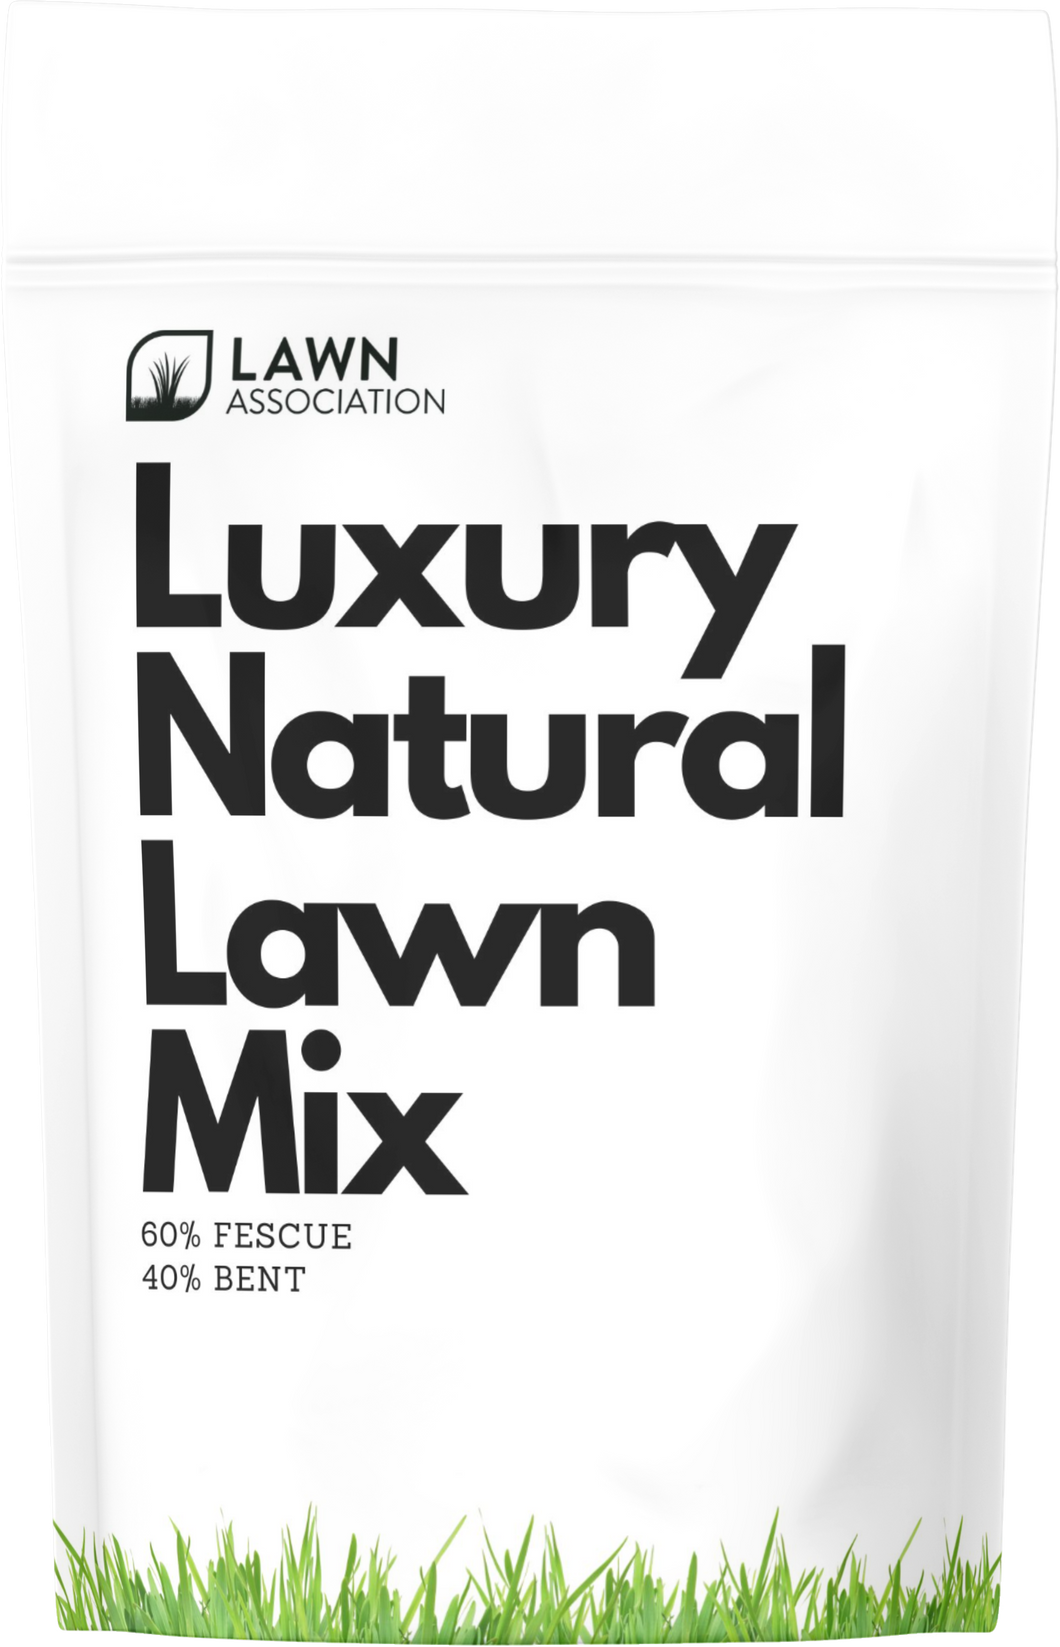 Luxury Natural Lawn Mix